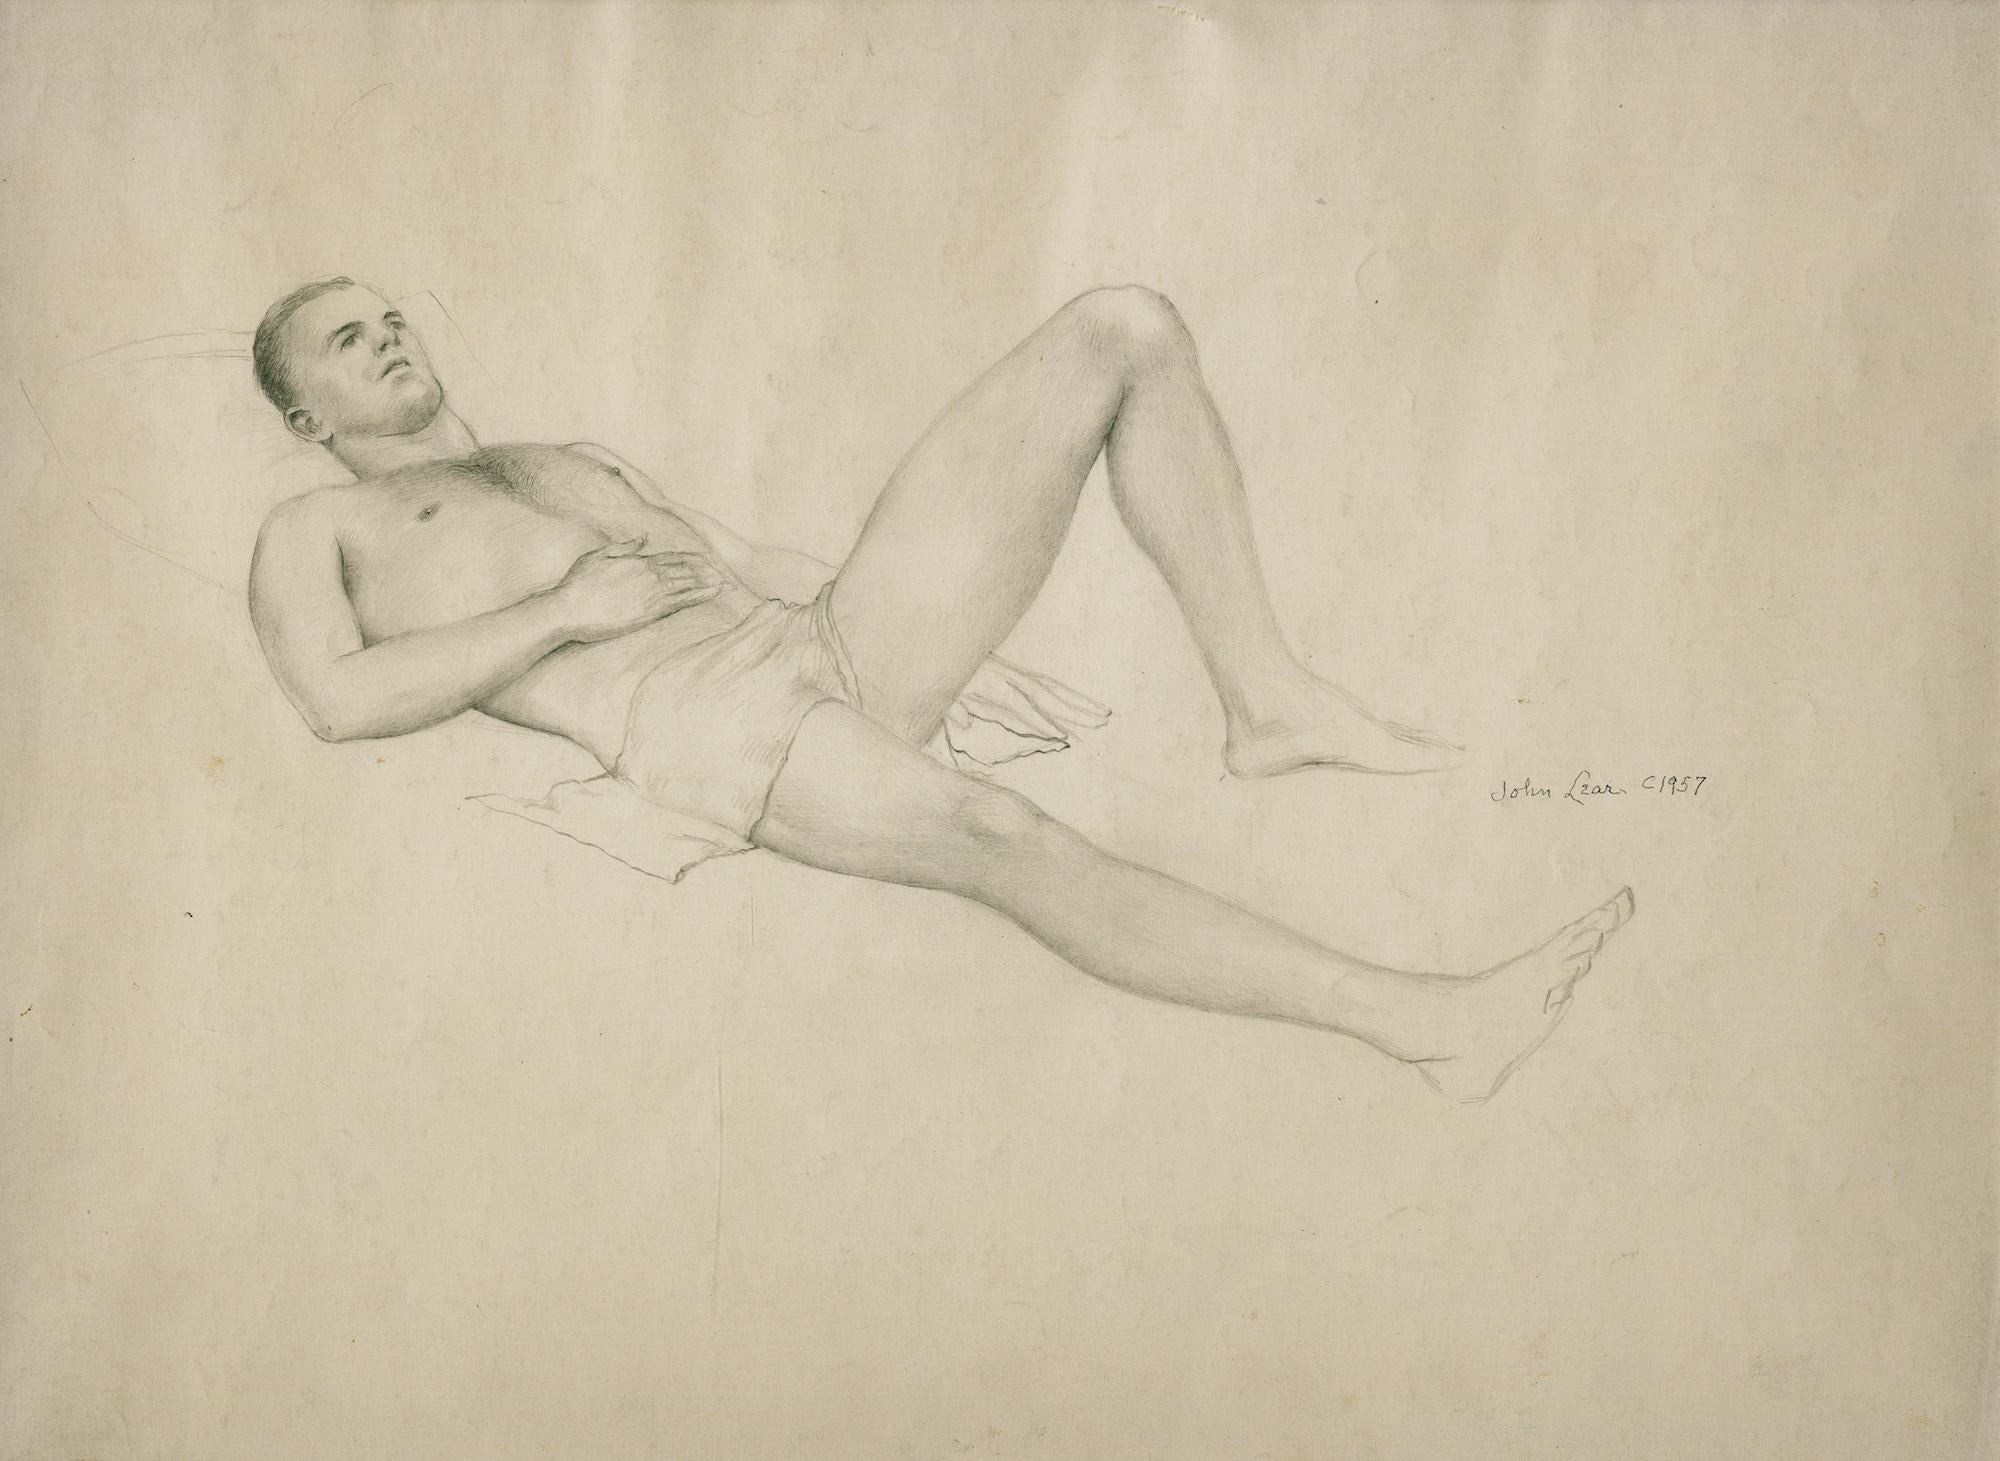 John Brock Lear Figurative Art - Resting Man (Man relaxes draped only in a small towel)